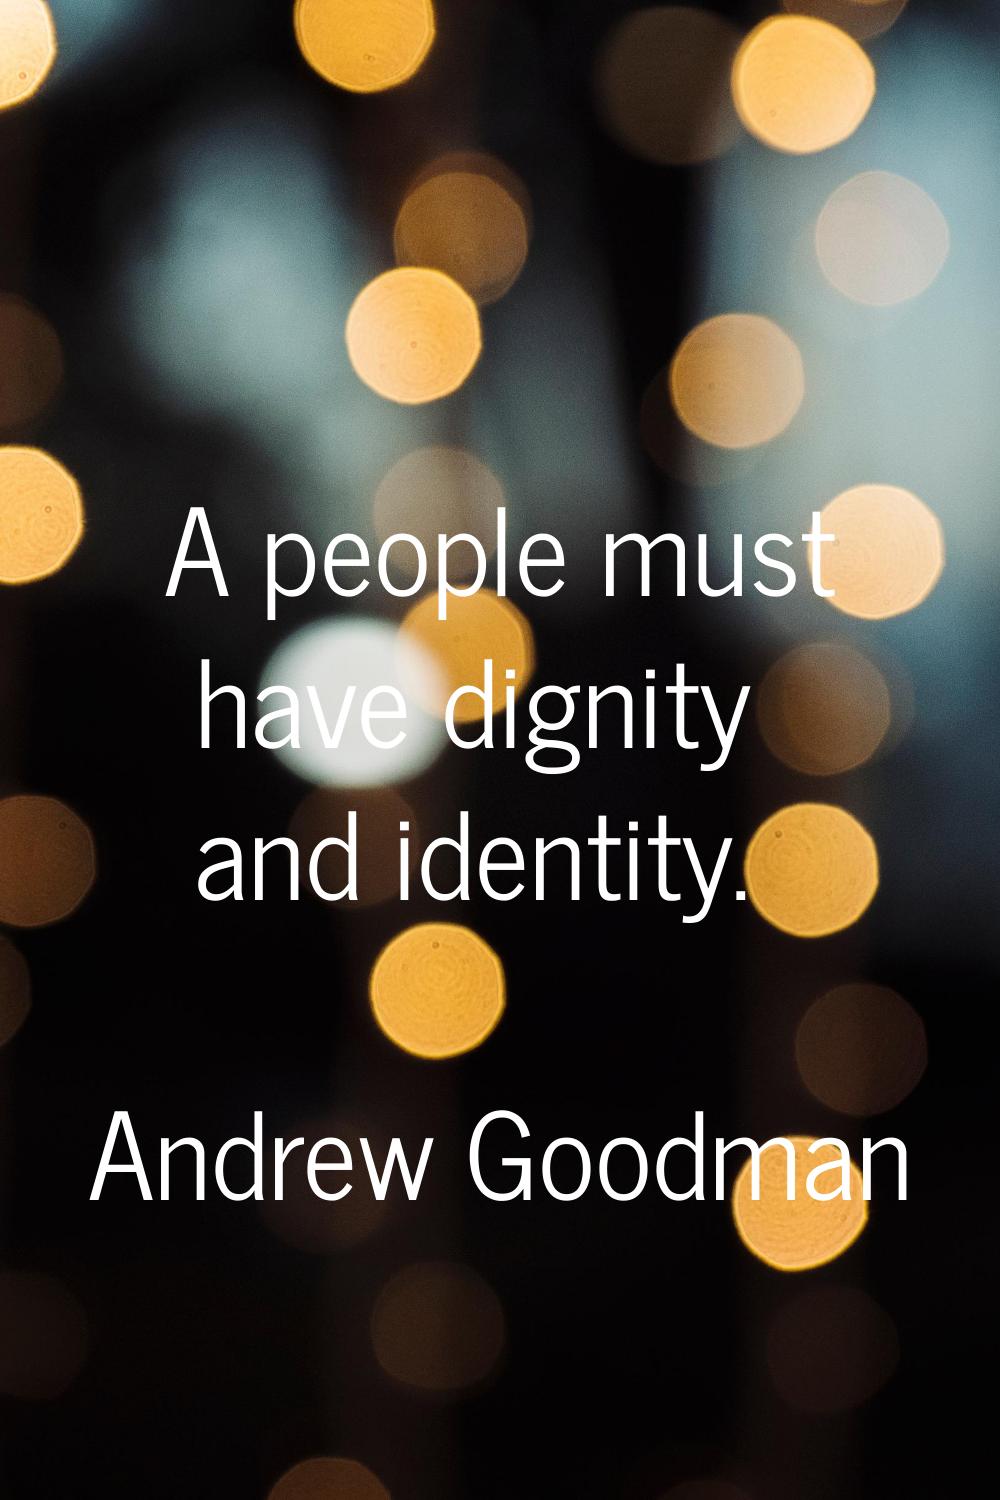 A people must have dignity and identity.